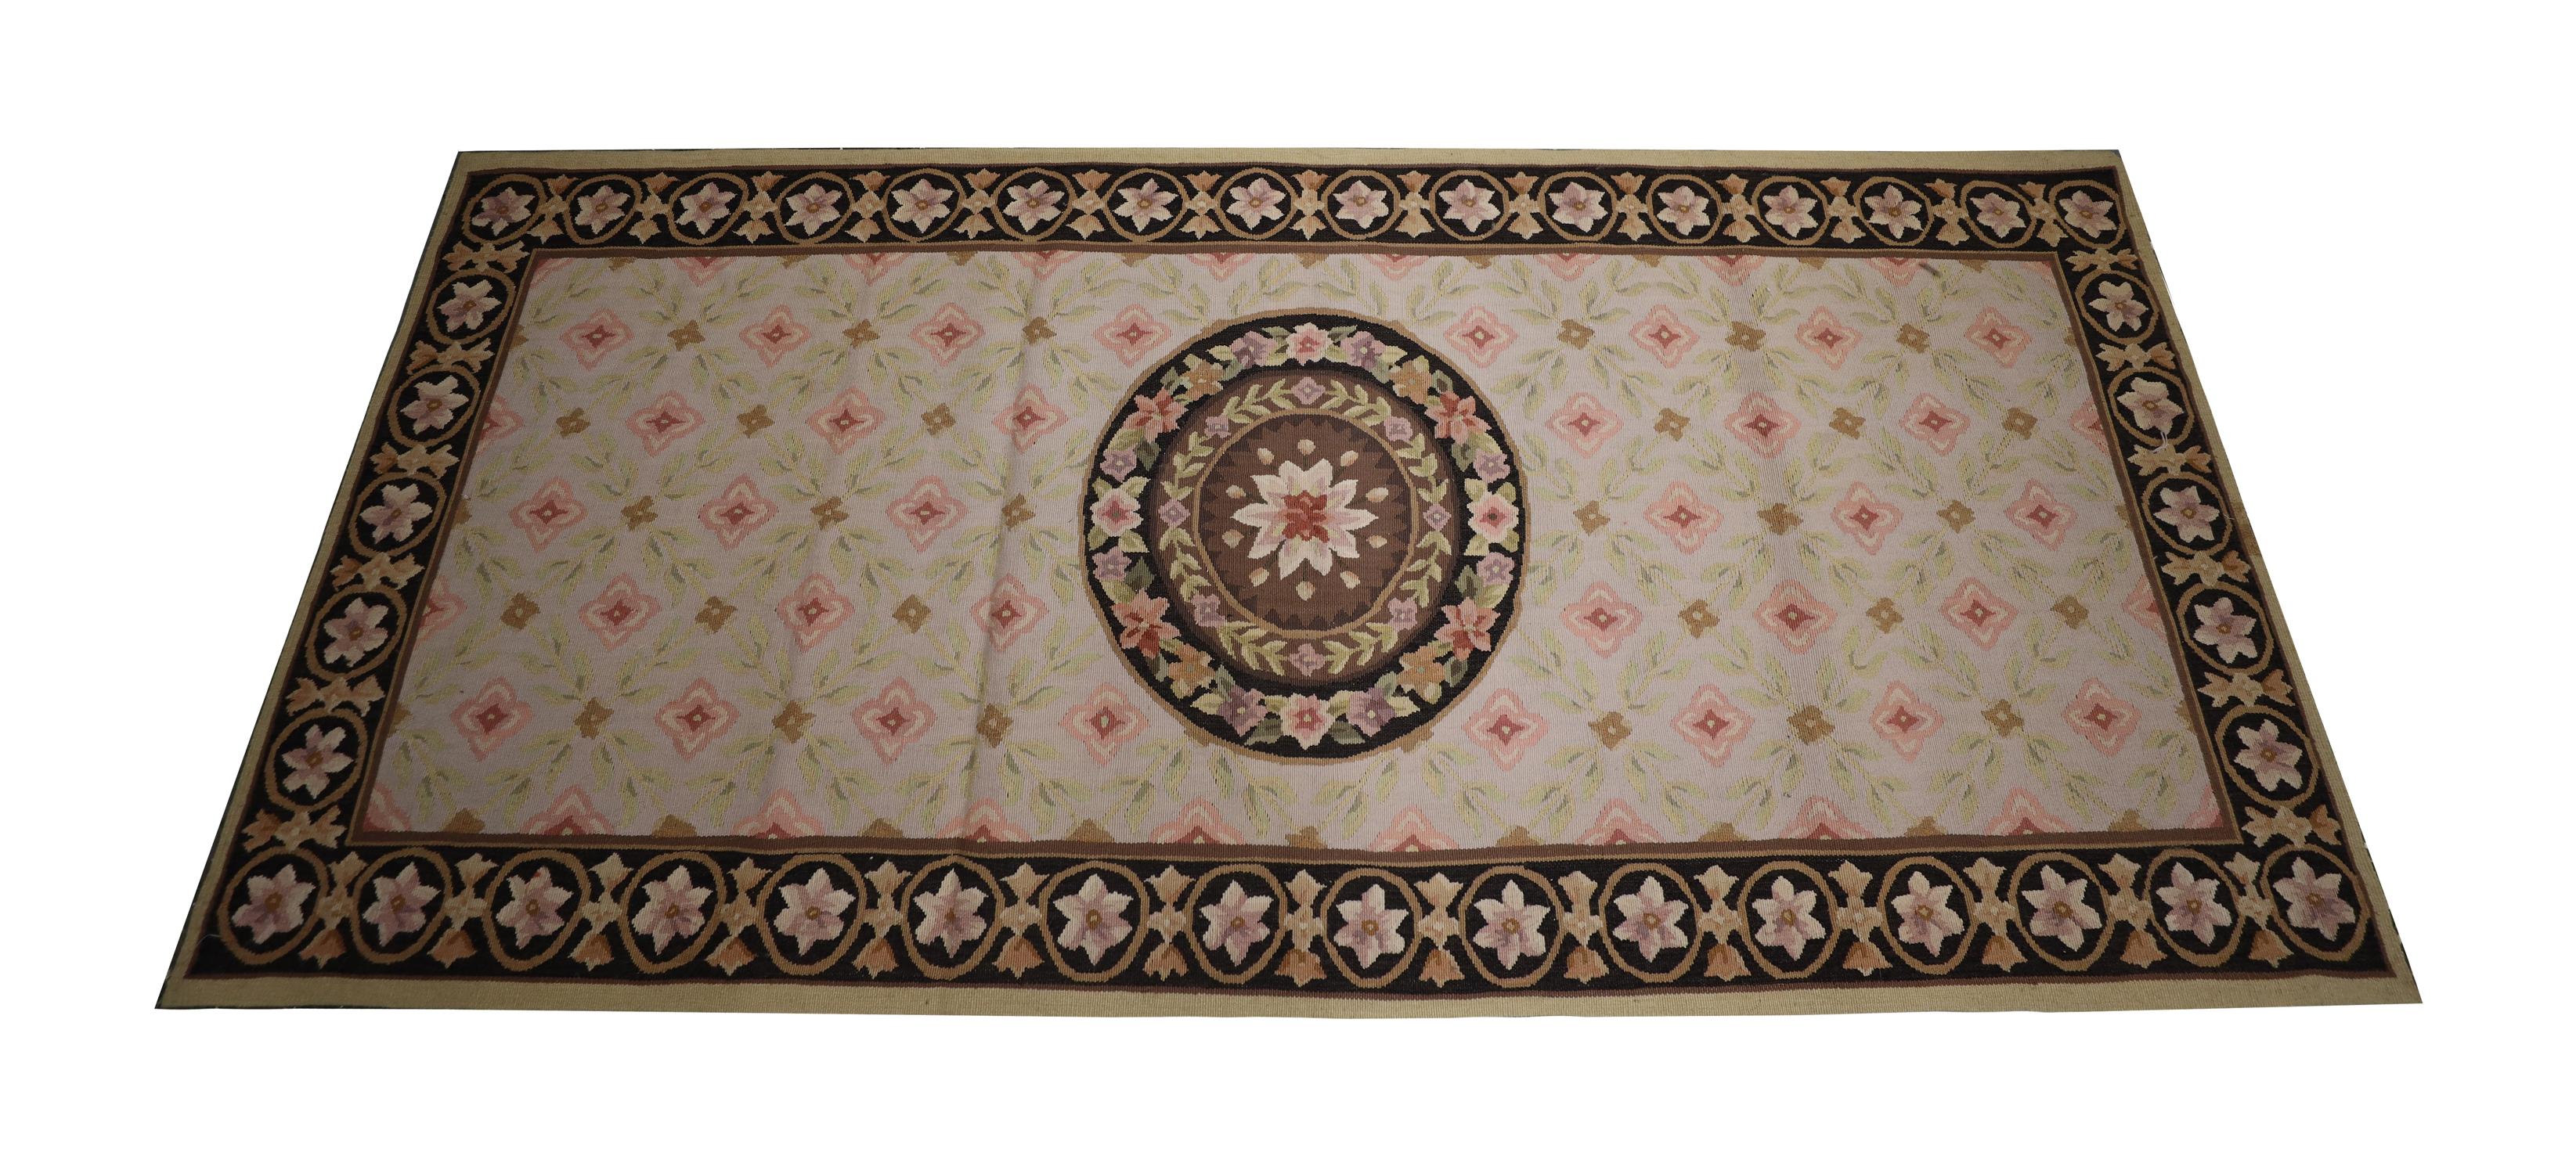 This new wool needlepoint is an elegant piece woven with an asymmetrical floral design woven with a beautiful circular floral medallion on a repeating pattern background. A bold enclosing border then frames this. The traditional design and